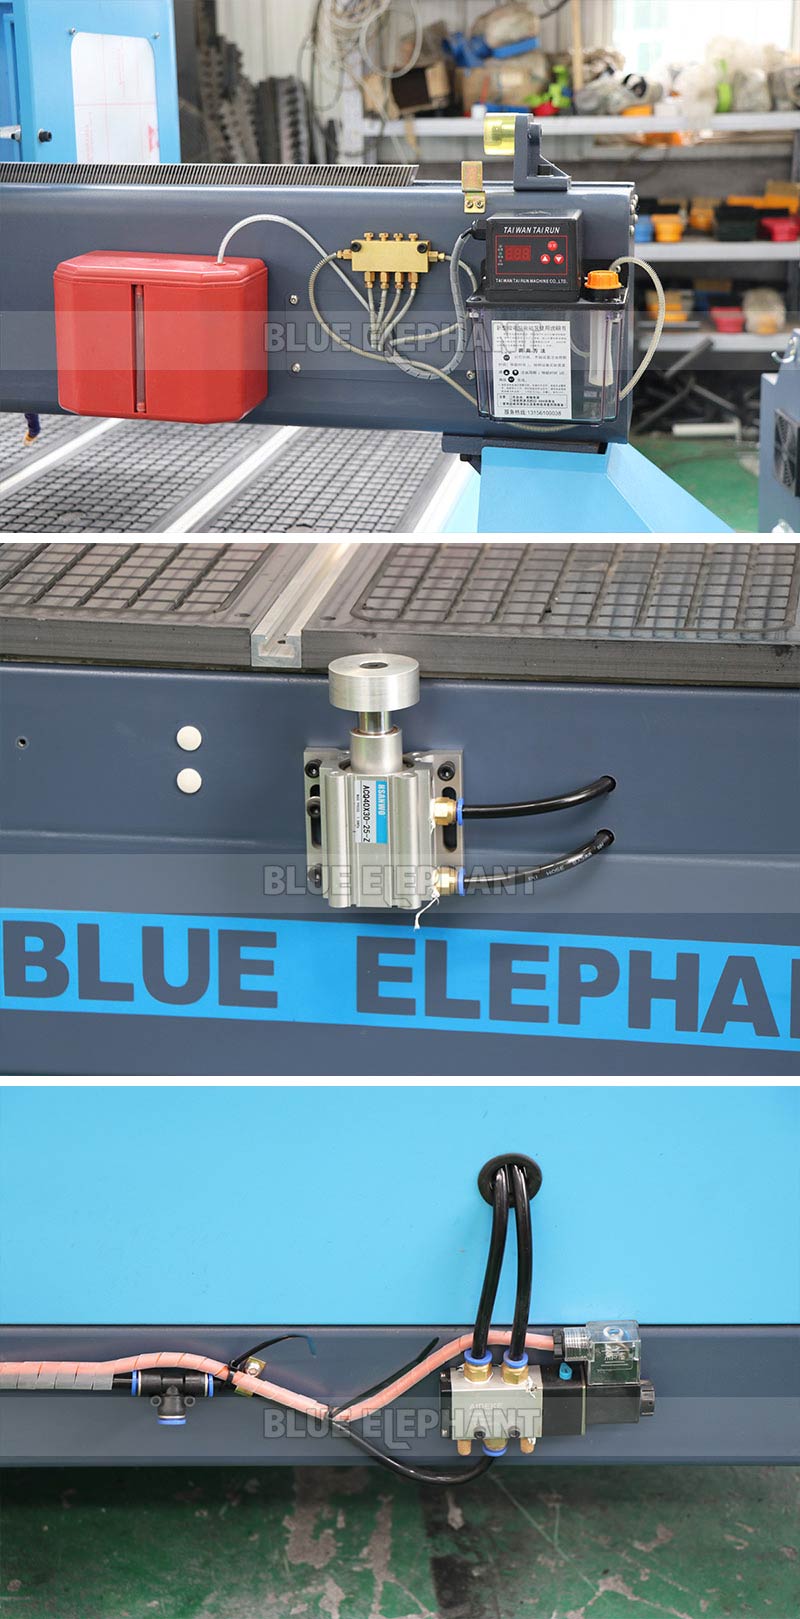 blue elephant cnc wood machines used to make furniture for complex patterns